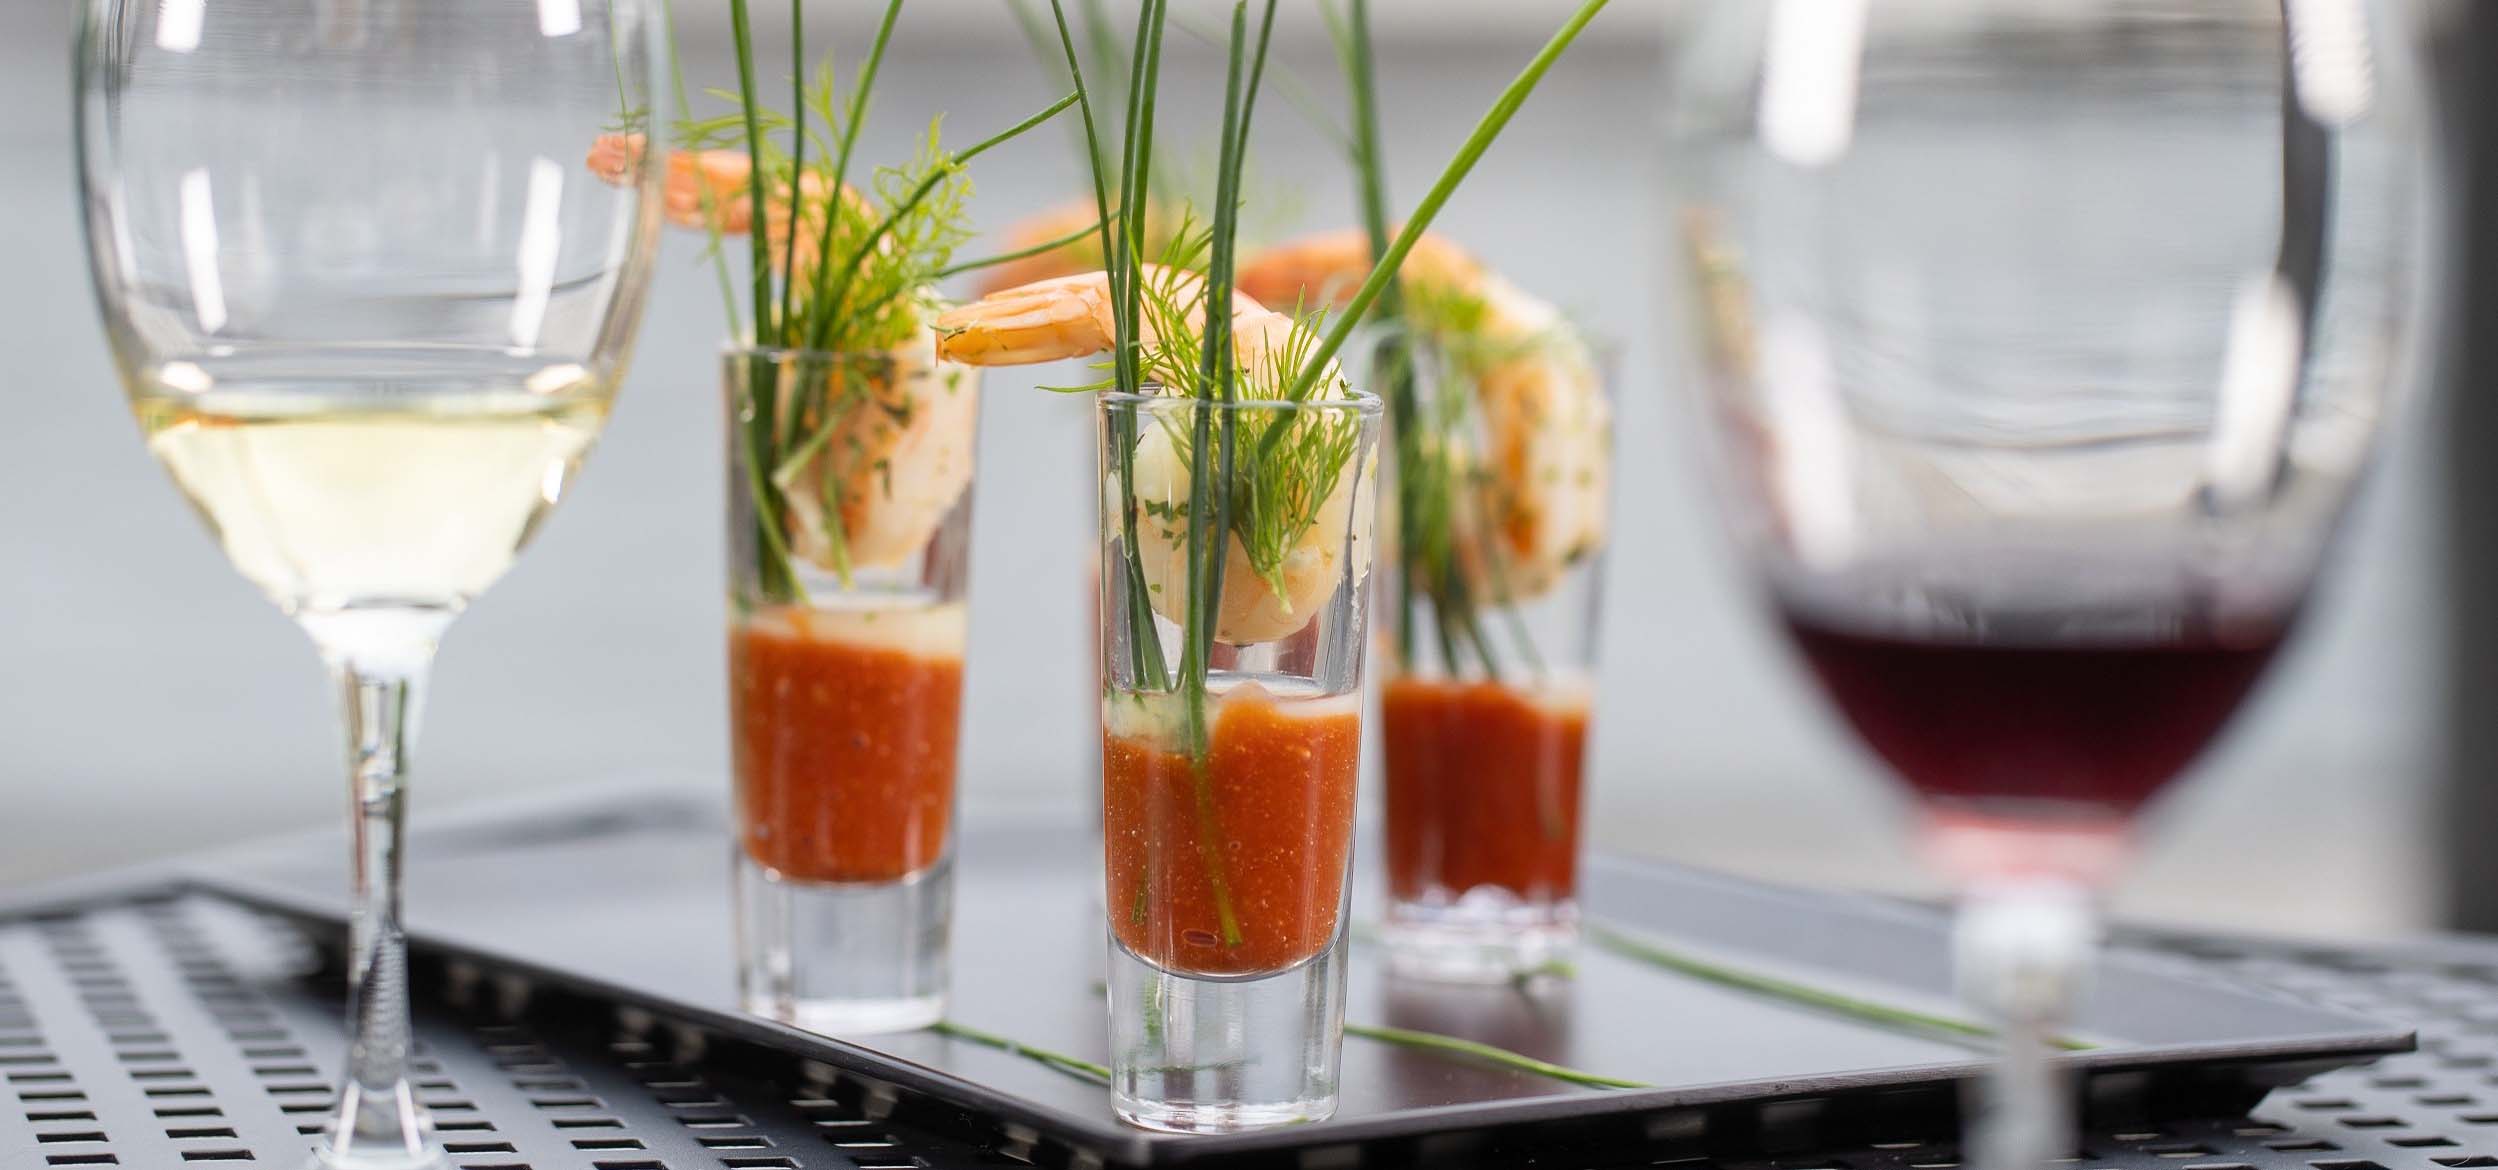 Tall shot glasses filled with cocktail sauce and prawns.